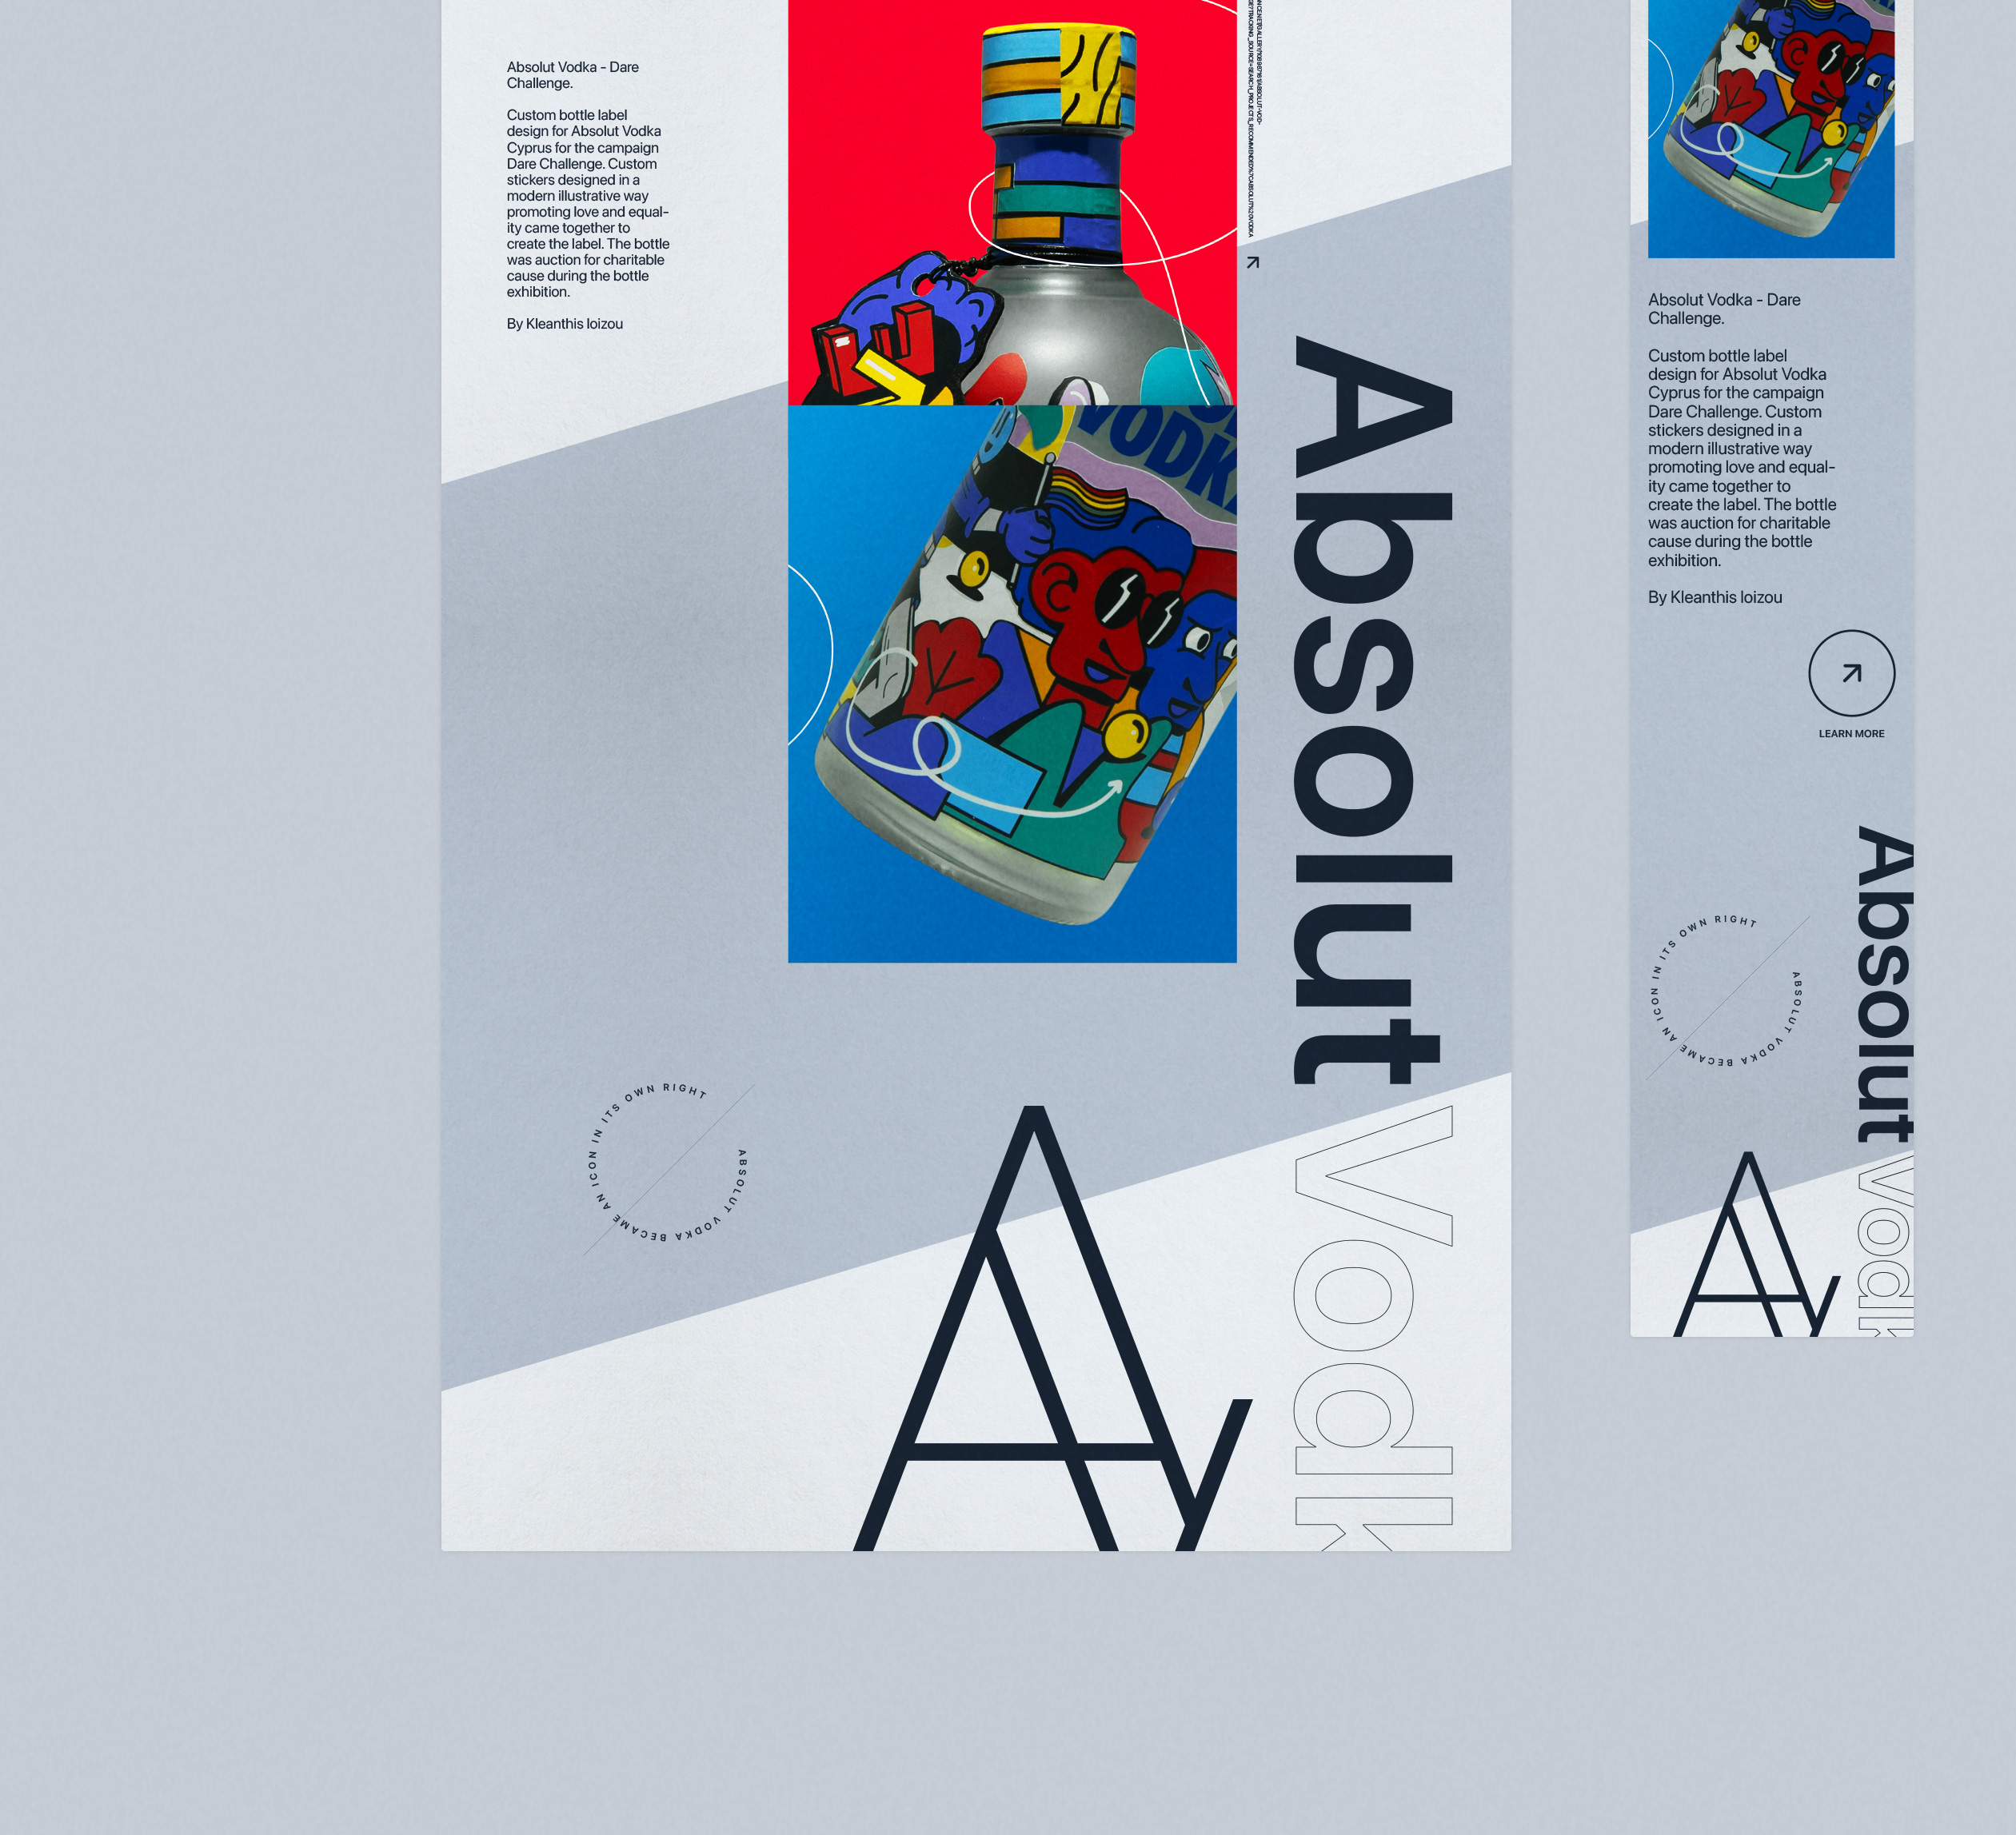 Absolut vodka website and branding redesign concept for 43 years in the market celebration.